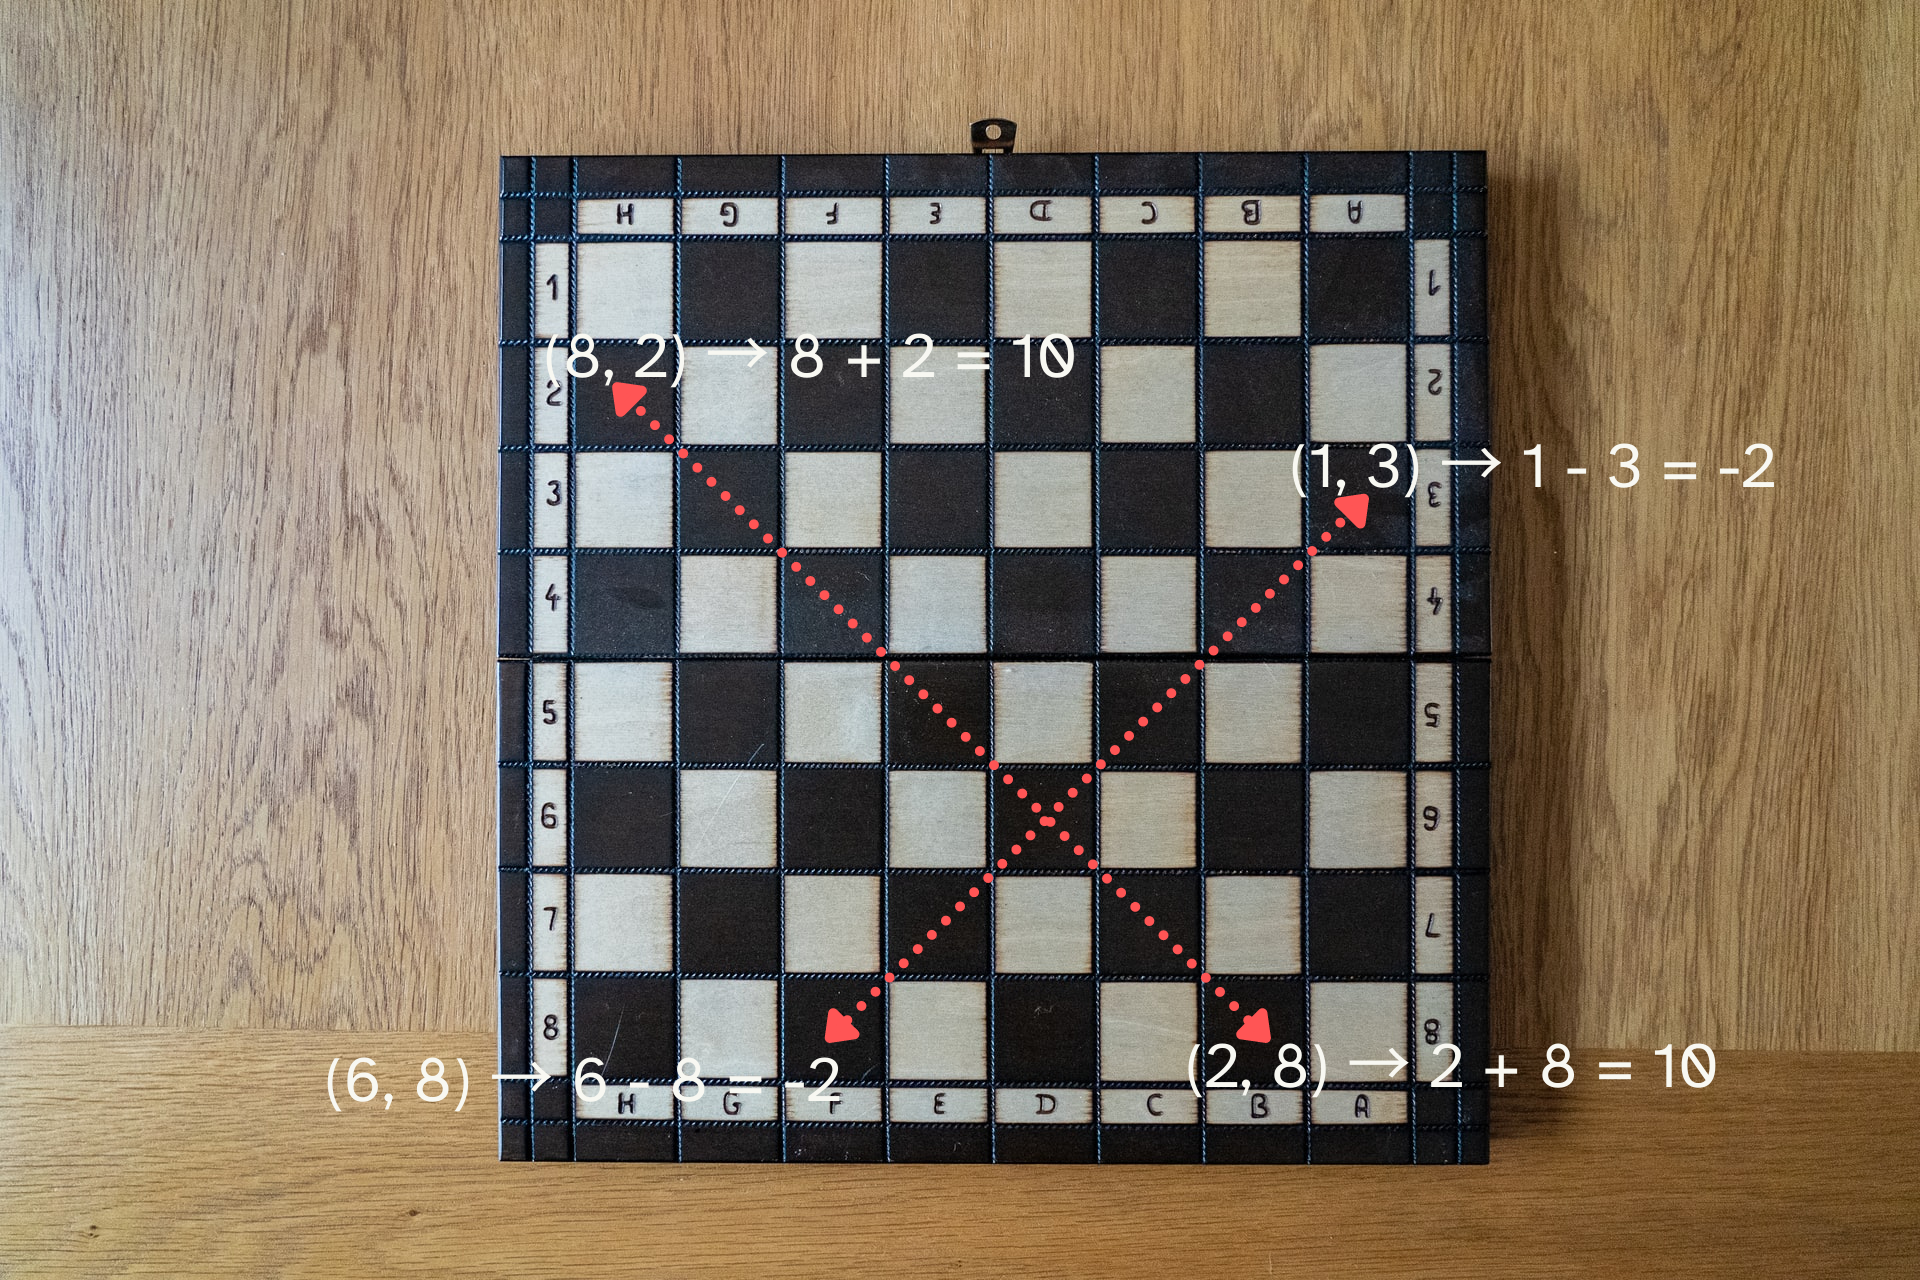 A chessboard with two highlighted diagonals showing their invariants.